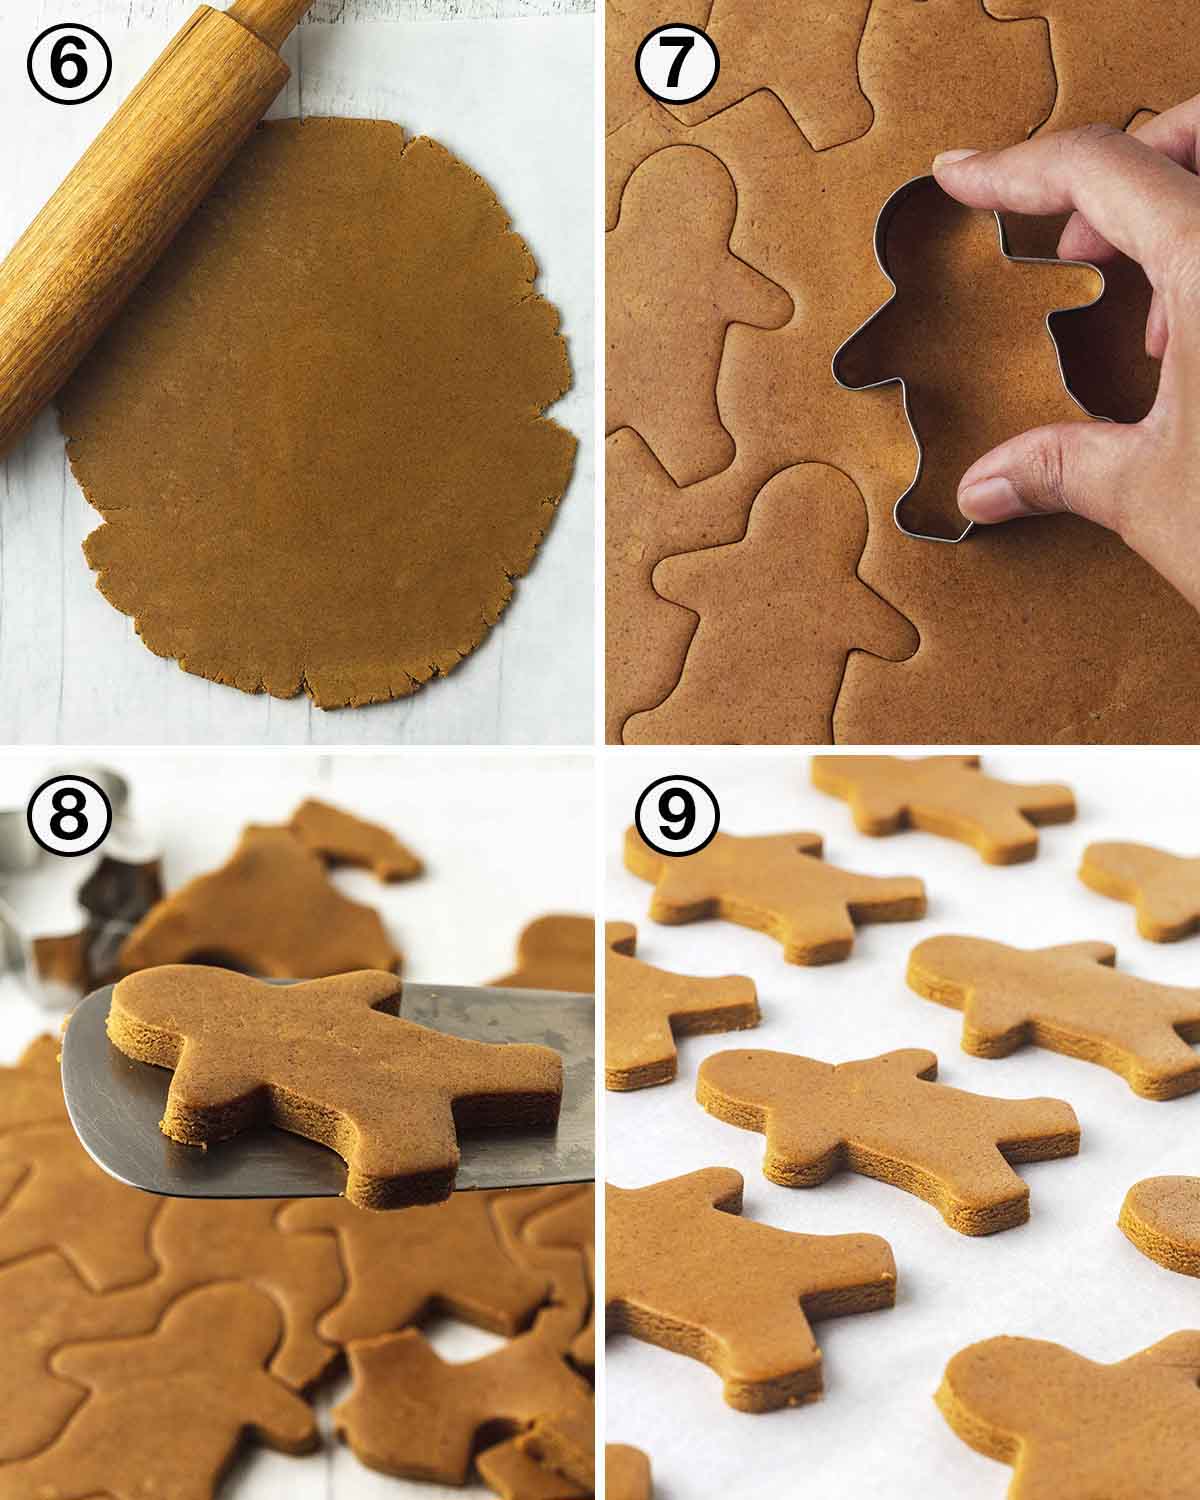 A collage of four images showing the second sequence of steps needed to make egg-free gingerbread cookies.